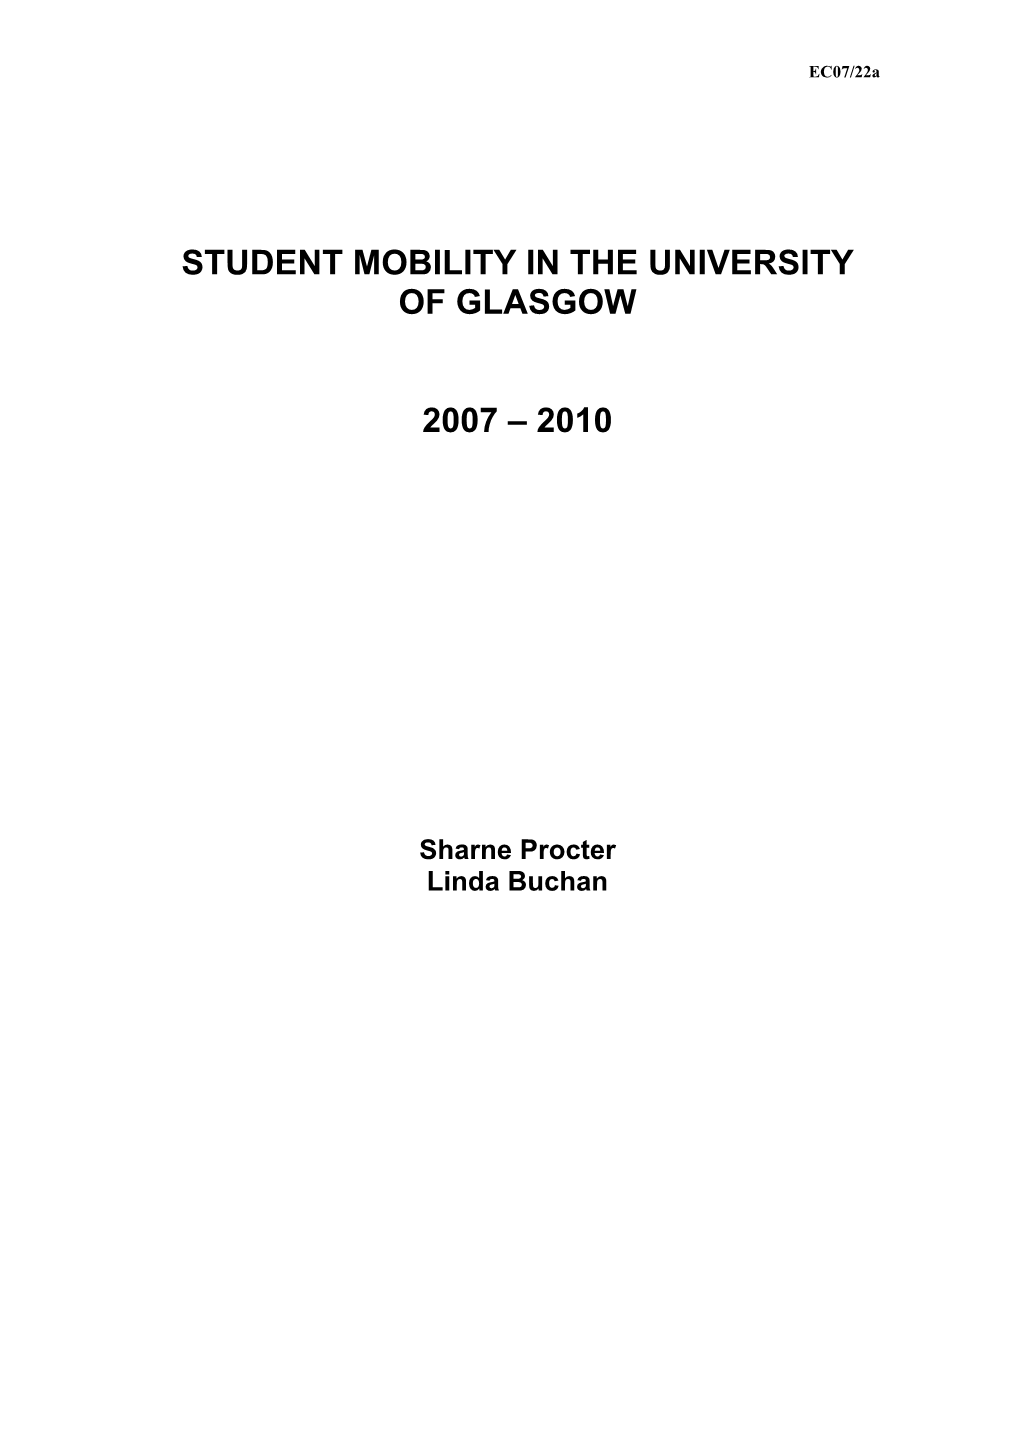 Student Mobility in the University of Glasgow 2007 – 2010